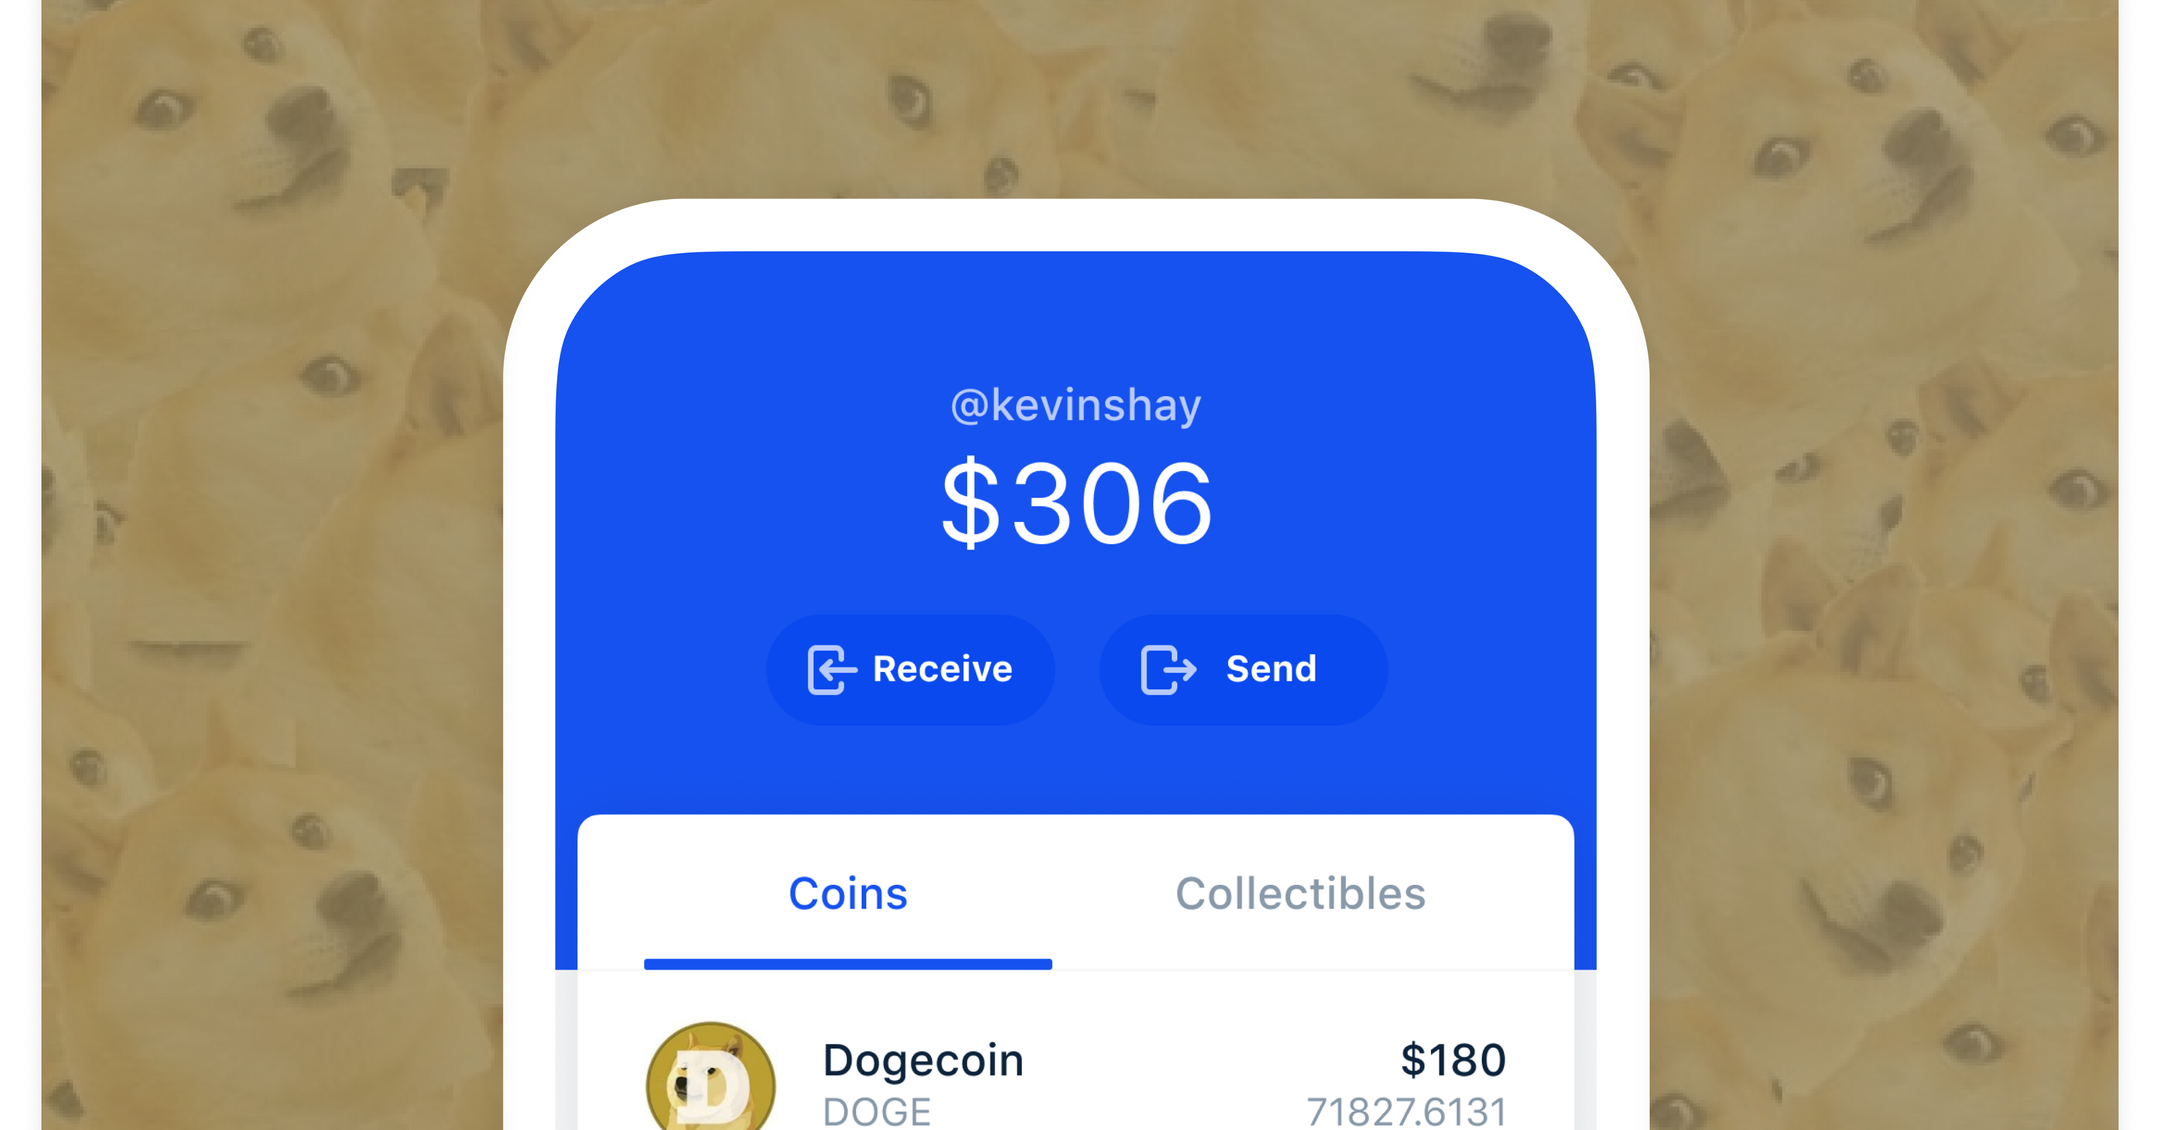 can u convert dogecoin to paypal using coinbase